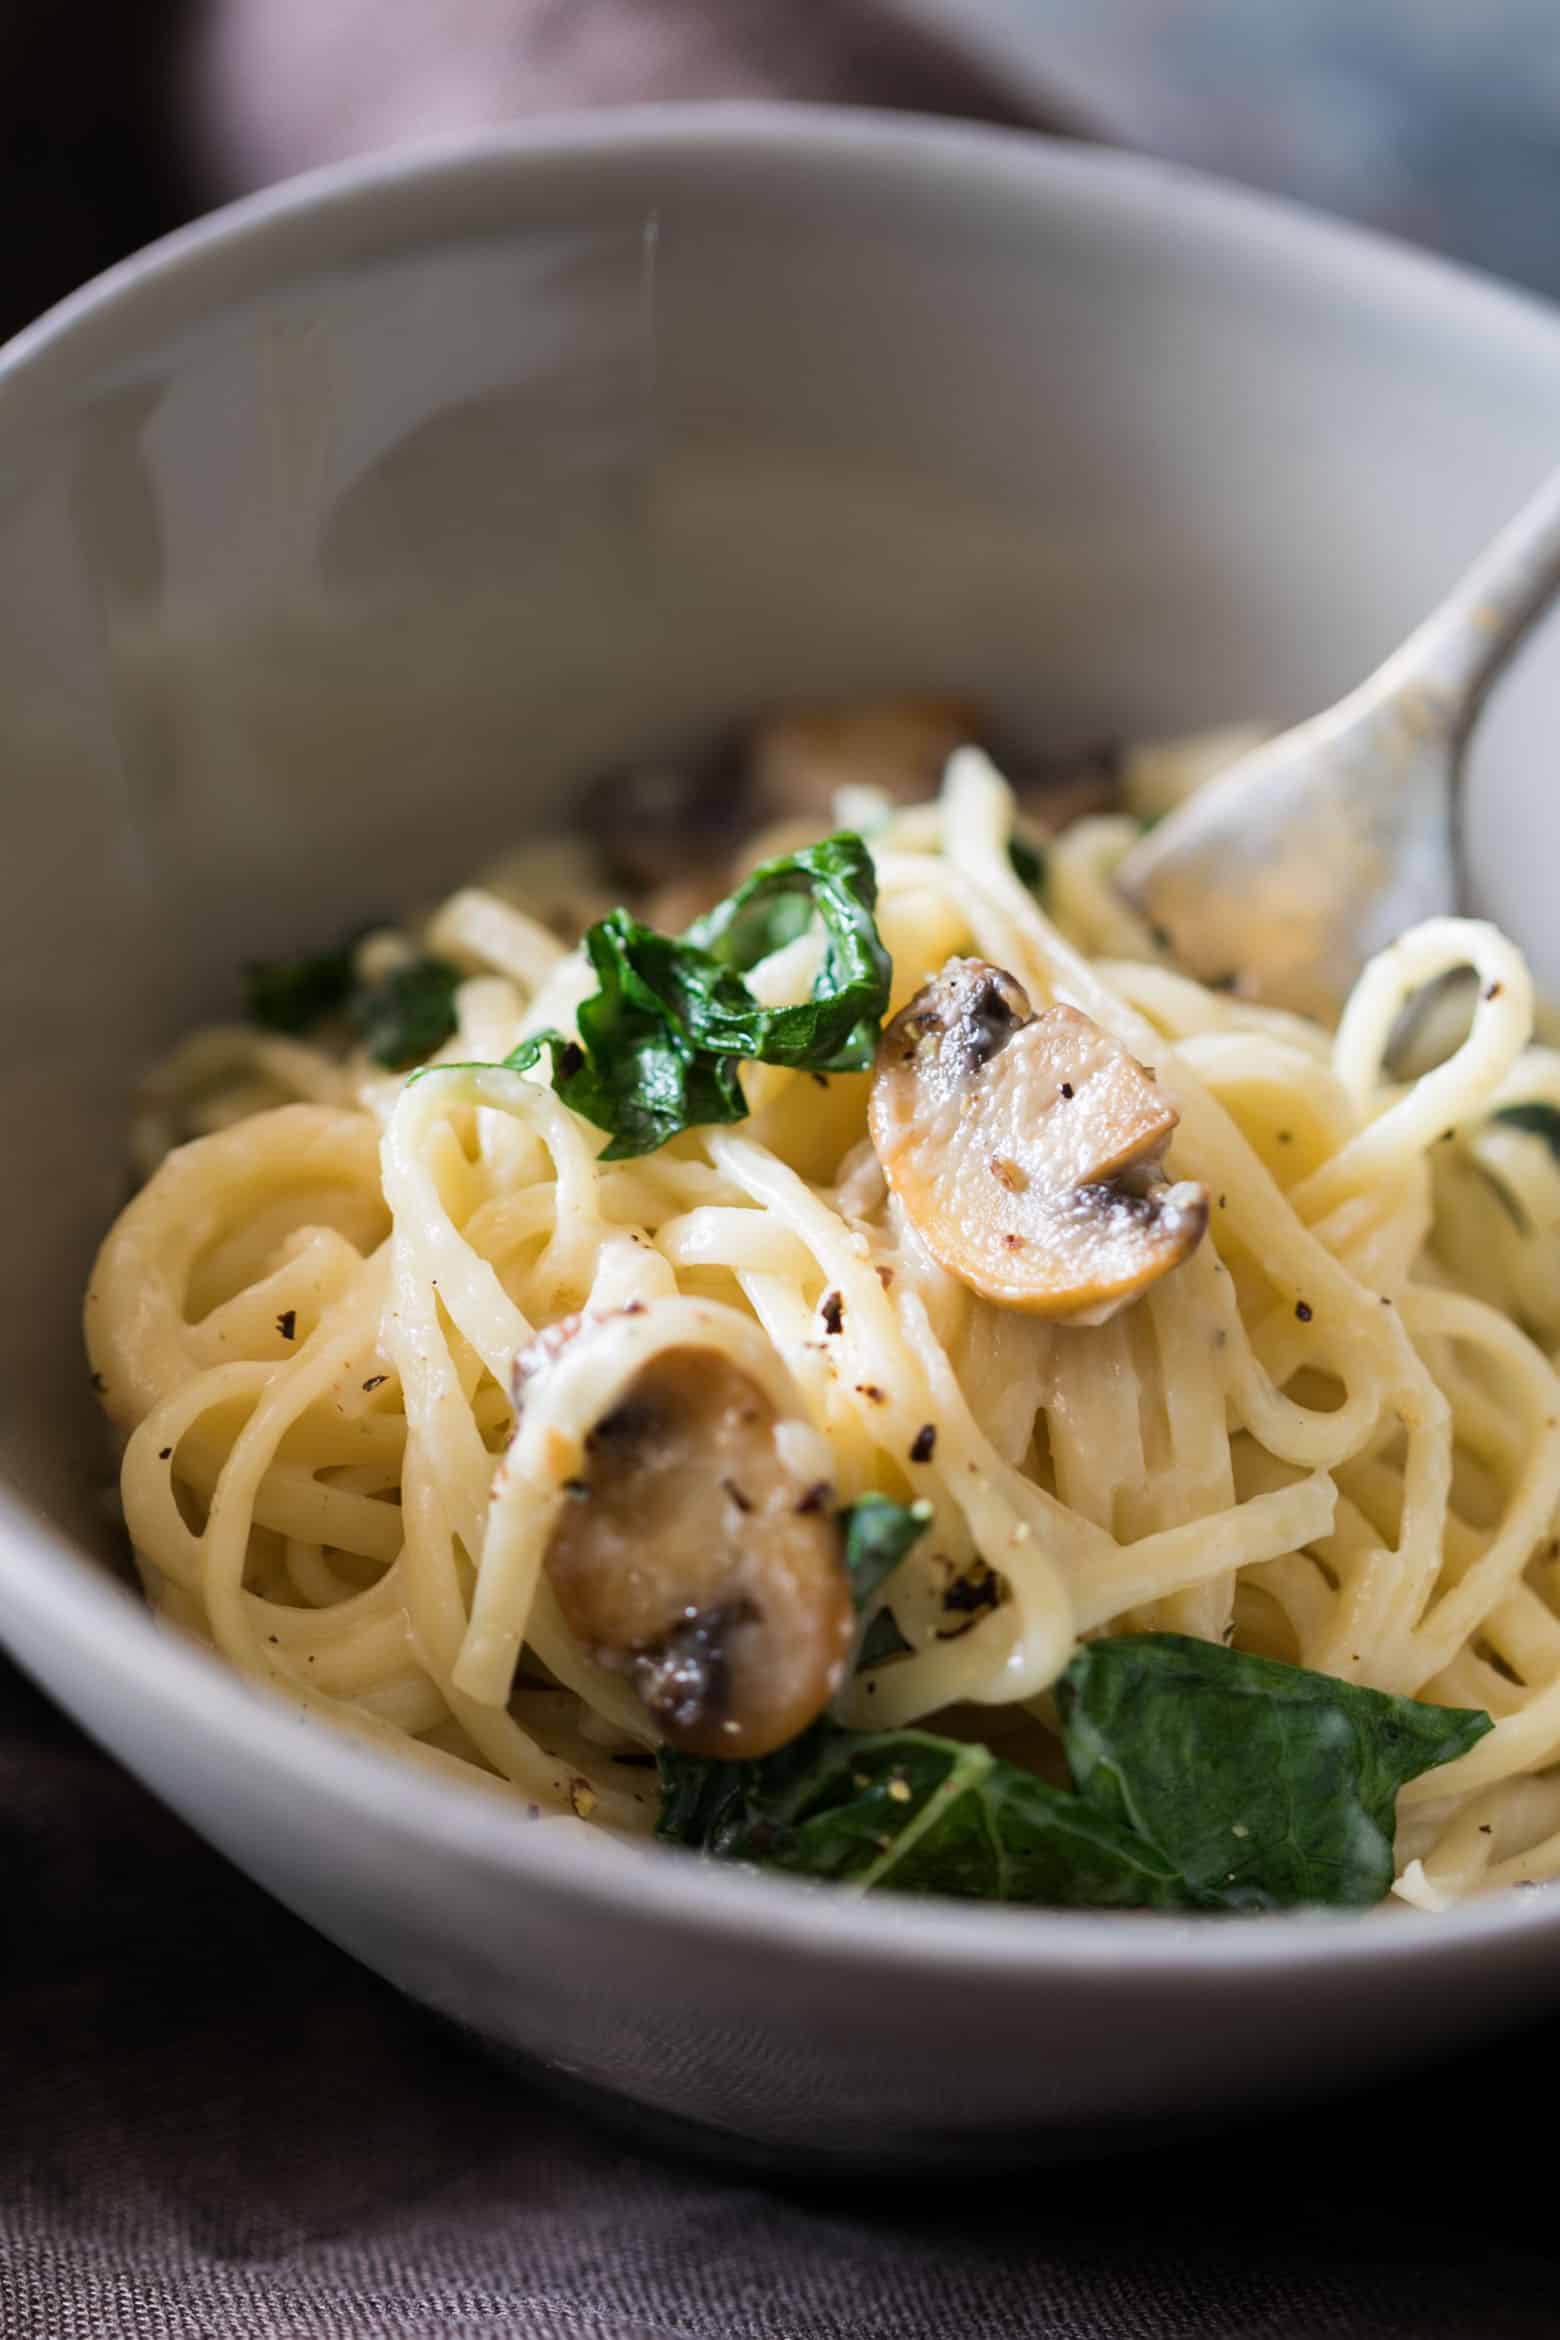 Creamy lemon mushroom kale linguine pasta is vegetarian, ready in 30 minutes with the best healthy alfredo style white sauce you'll make!